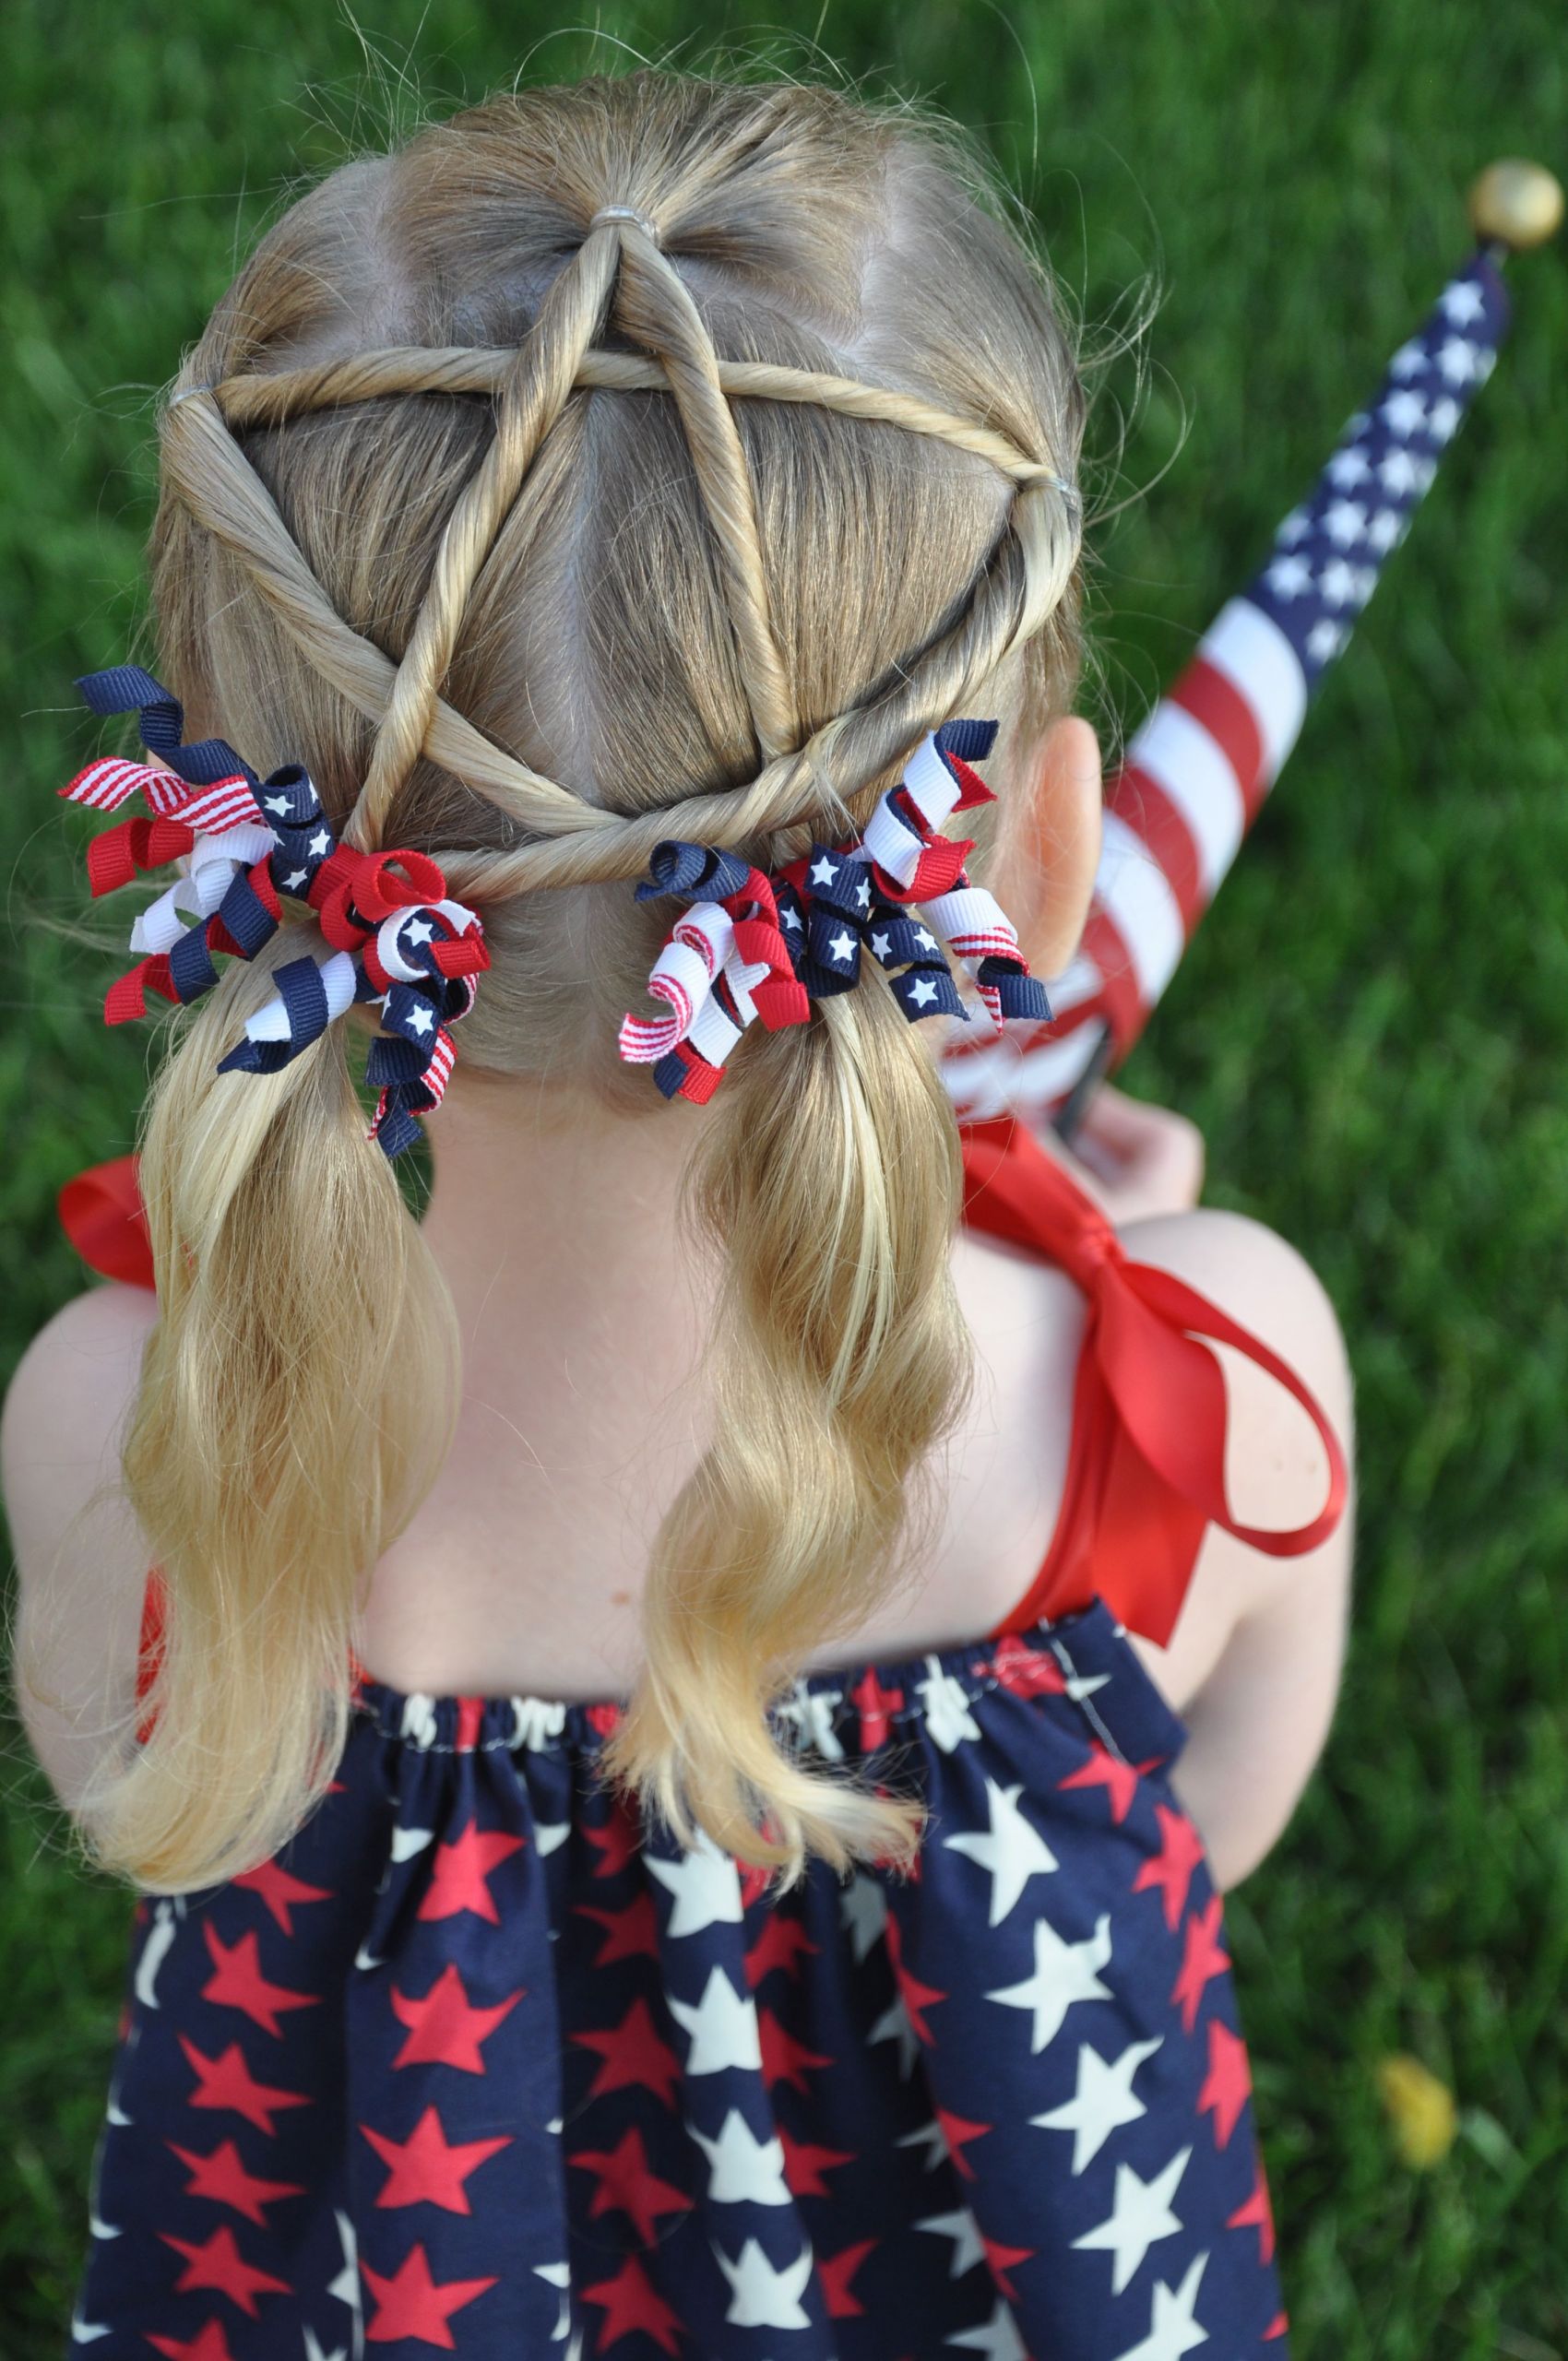 Star Hairstyle For Little Girl
 37 Creative Hairstyle Ideas For Little Girls